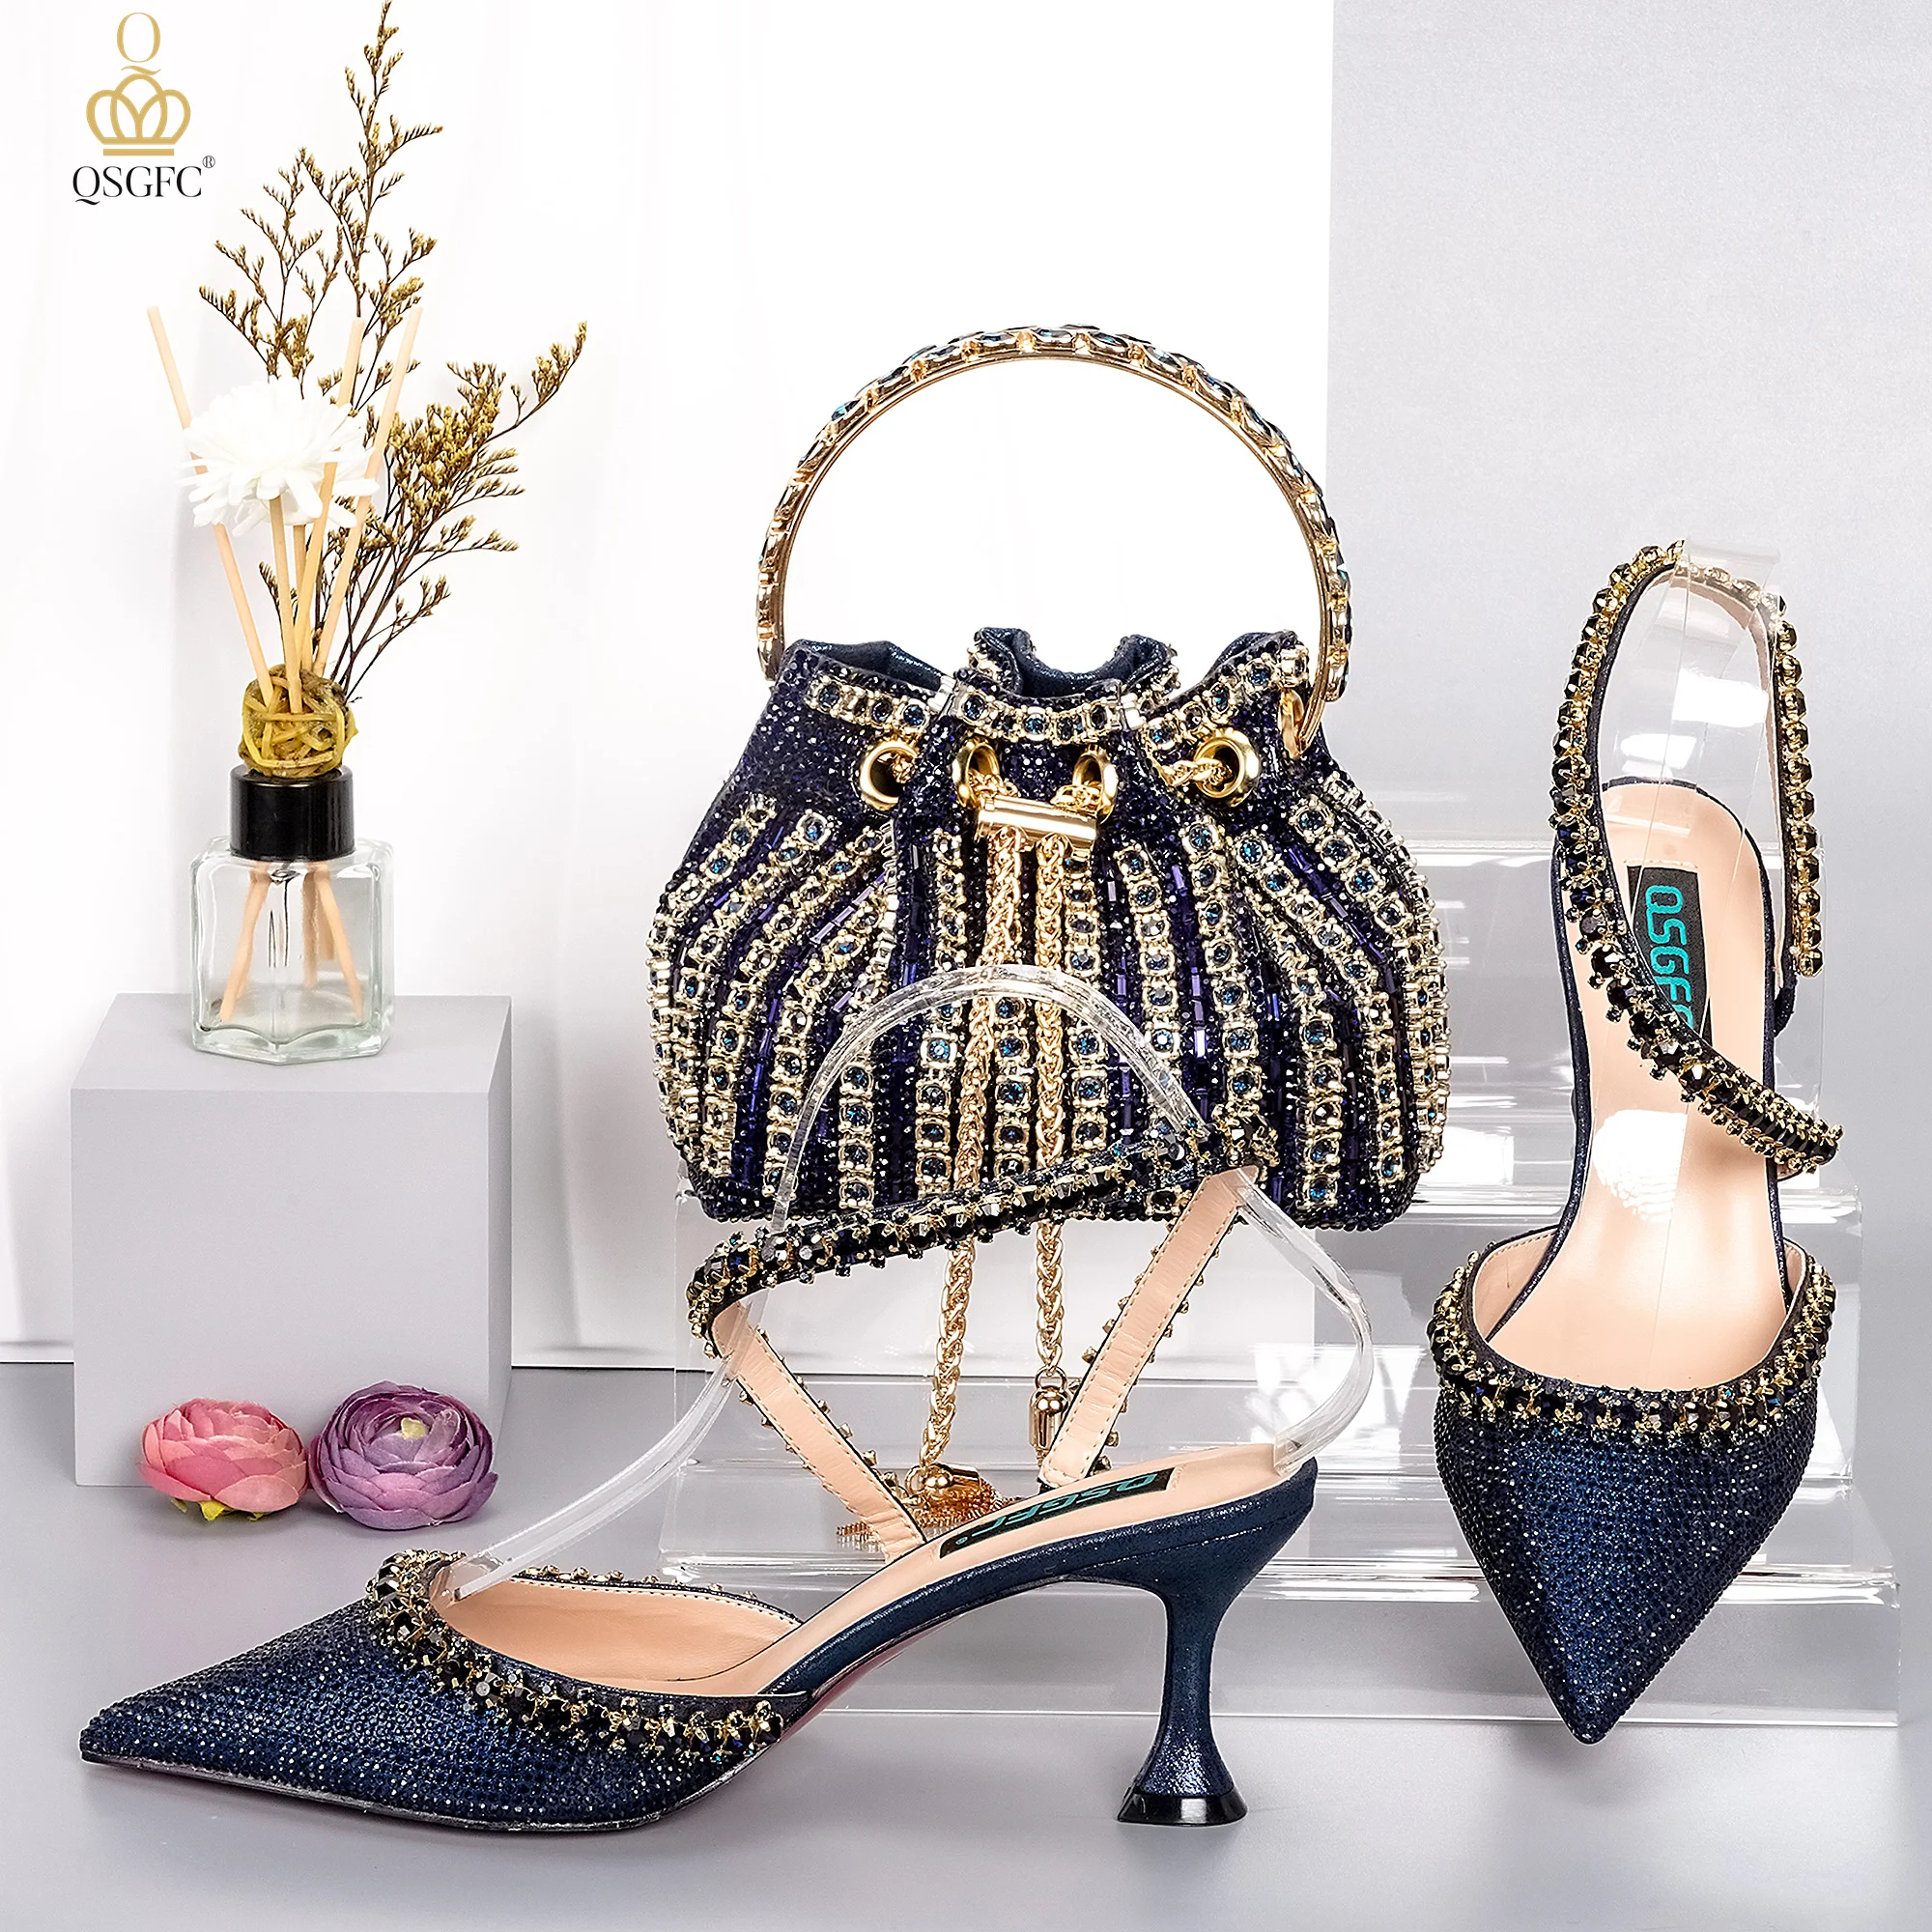 

QSGFC Elegant Navy Blue Diamond Chain High Heels Tassel Bucket Tote Crossbody Carry Sophisticated Party Style